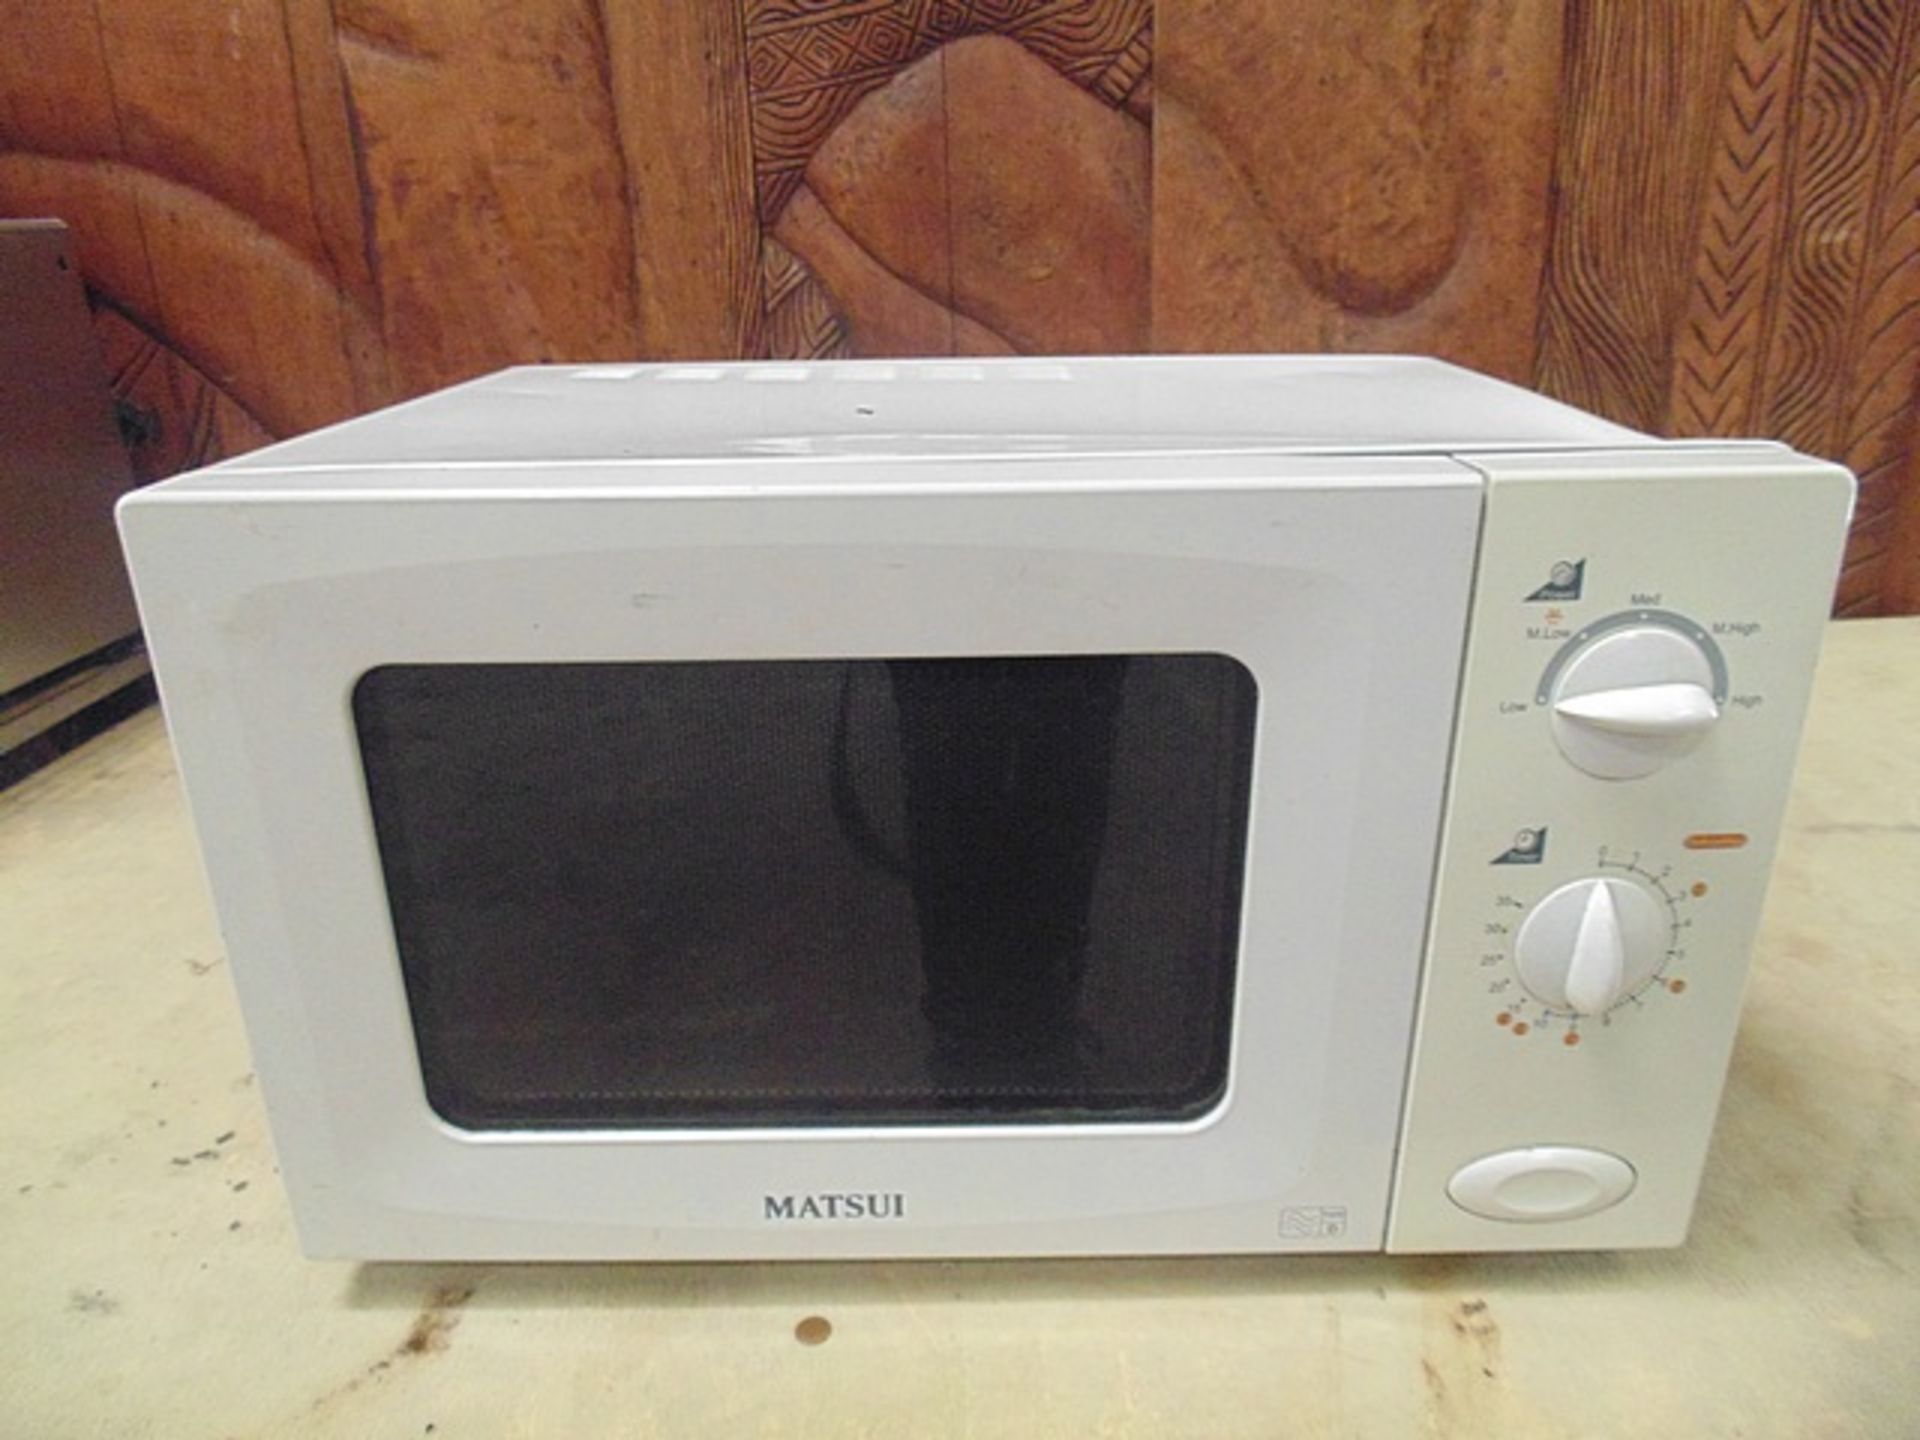 Matsui MS 106 WH 19 litre microwave 5 power levels 700W 520mm x 390mm